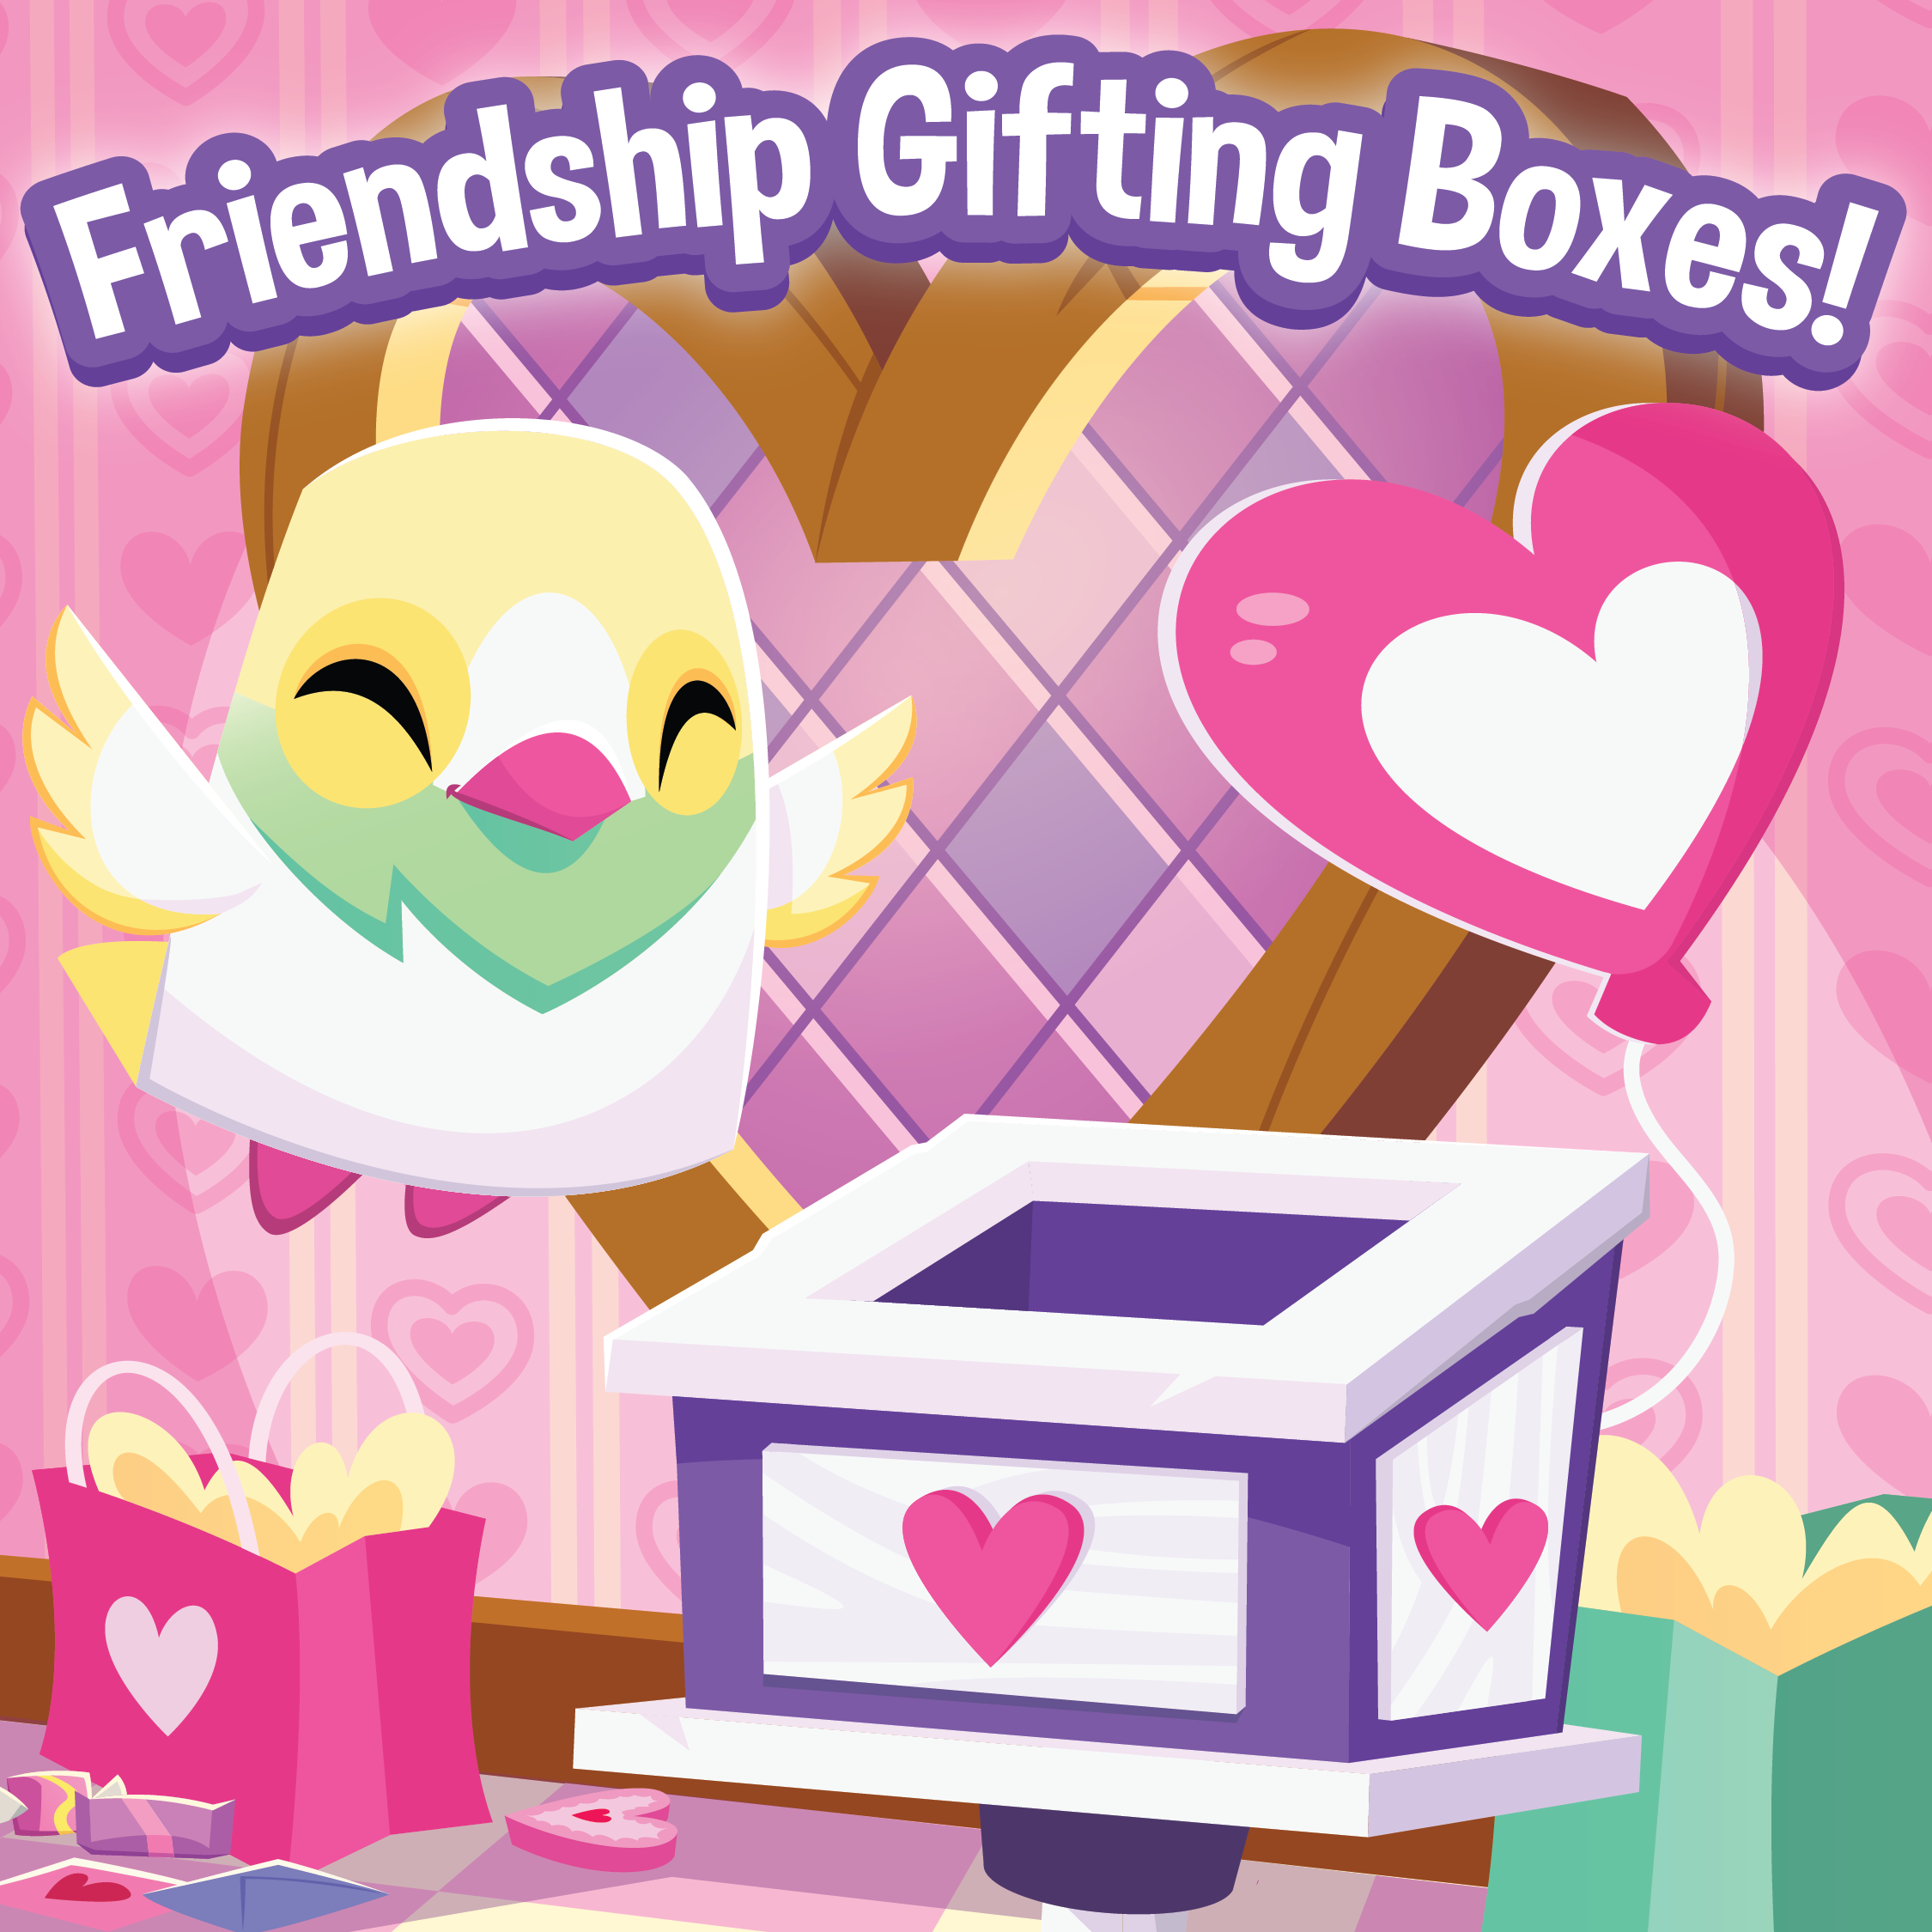 20220209 Friendship Gifting Boxes Post!-01 (1)